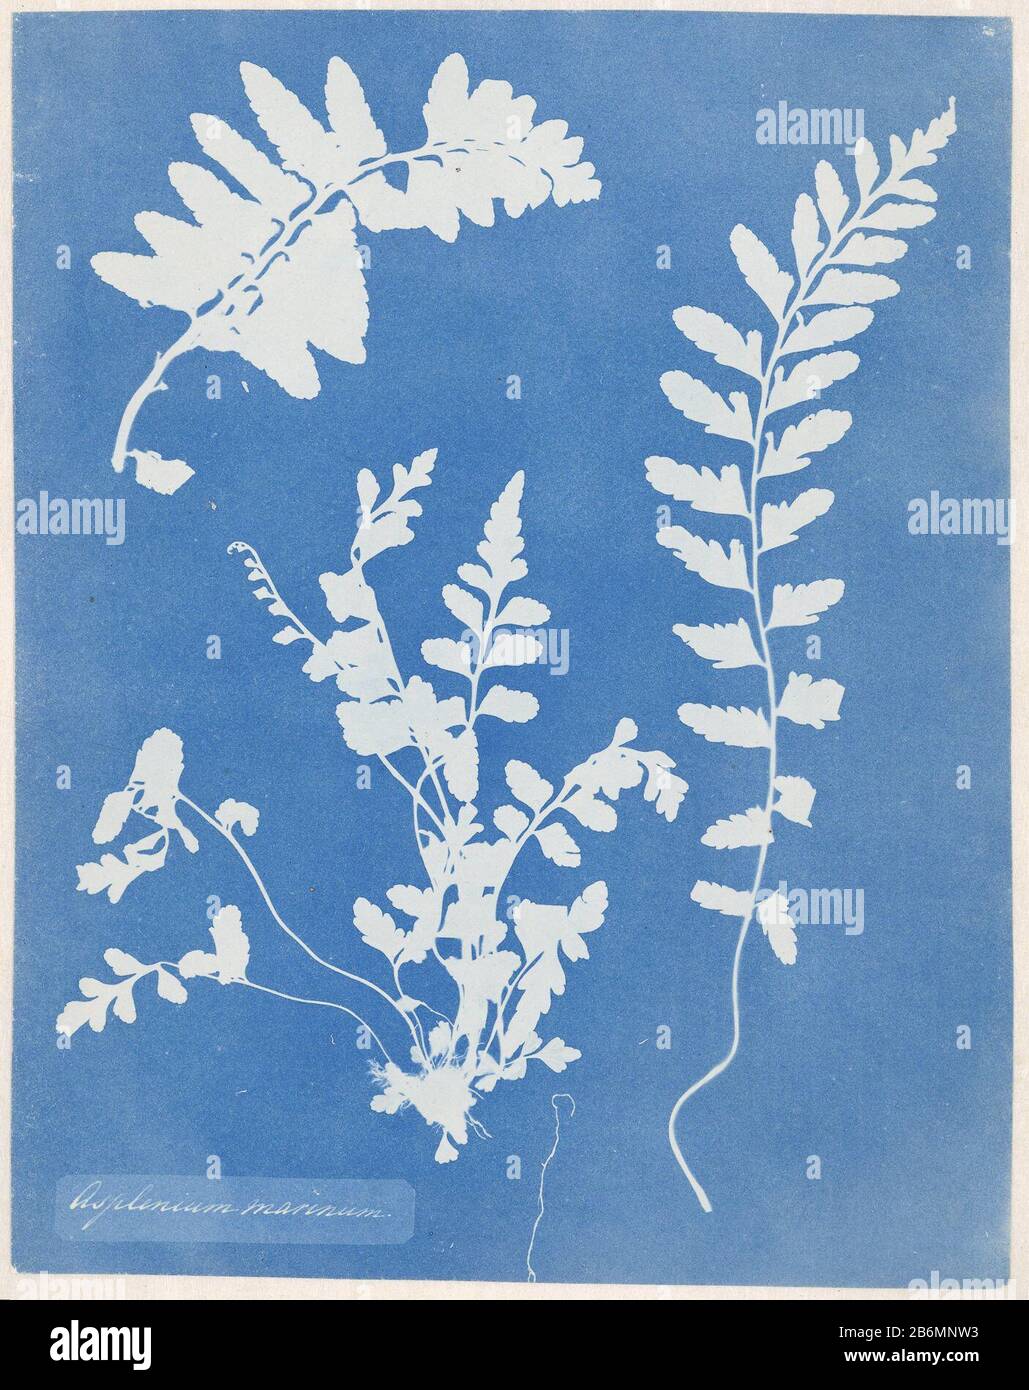 Fotogram van een Zeestreepvaren (Asplenium marinum) Asplenium marinum (titel op object) Photogram of Asplenium marinum (Asplenium marinum) Asplenium marinum (title object) Property Type: photogram Item number: RP-F F80152 Manufacturer : photographer Anna Atkins Place manufacture: England Date: approx 1854 Physical features: cyanotypie Material: Paper Engineering : cyanotypie Dimensions: photo: h 247 mm × W 193 mm Subject: plants; vegetation and Stock Photo